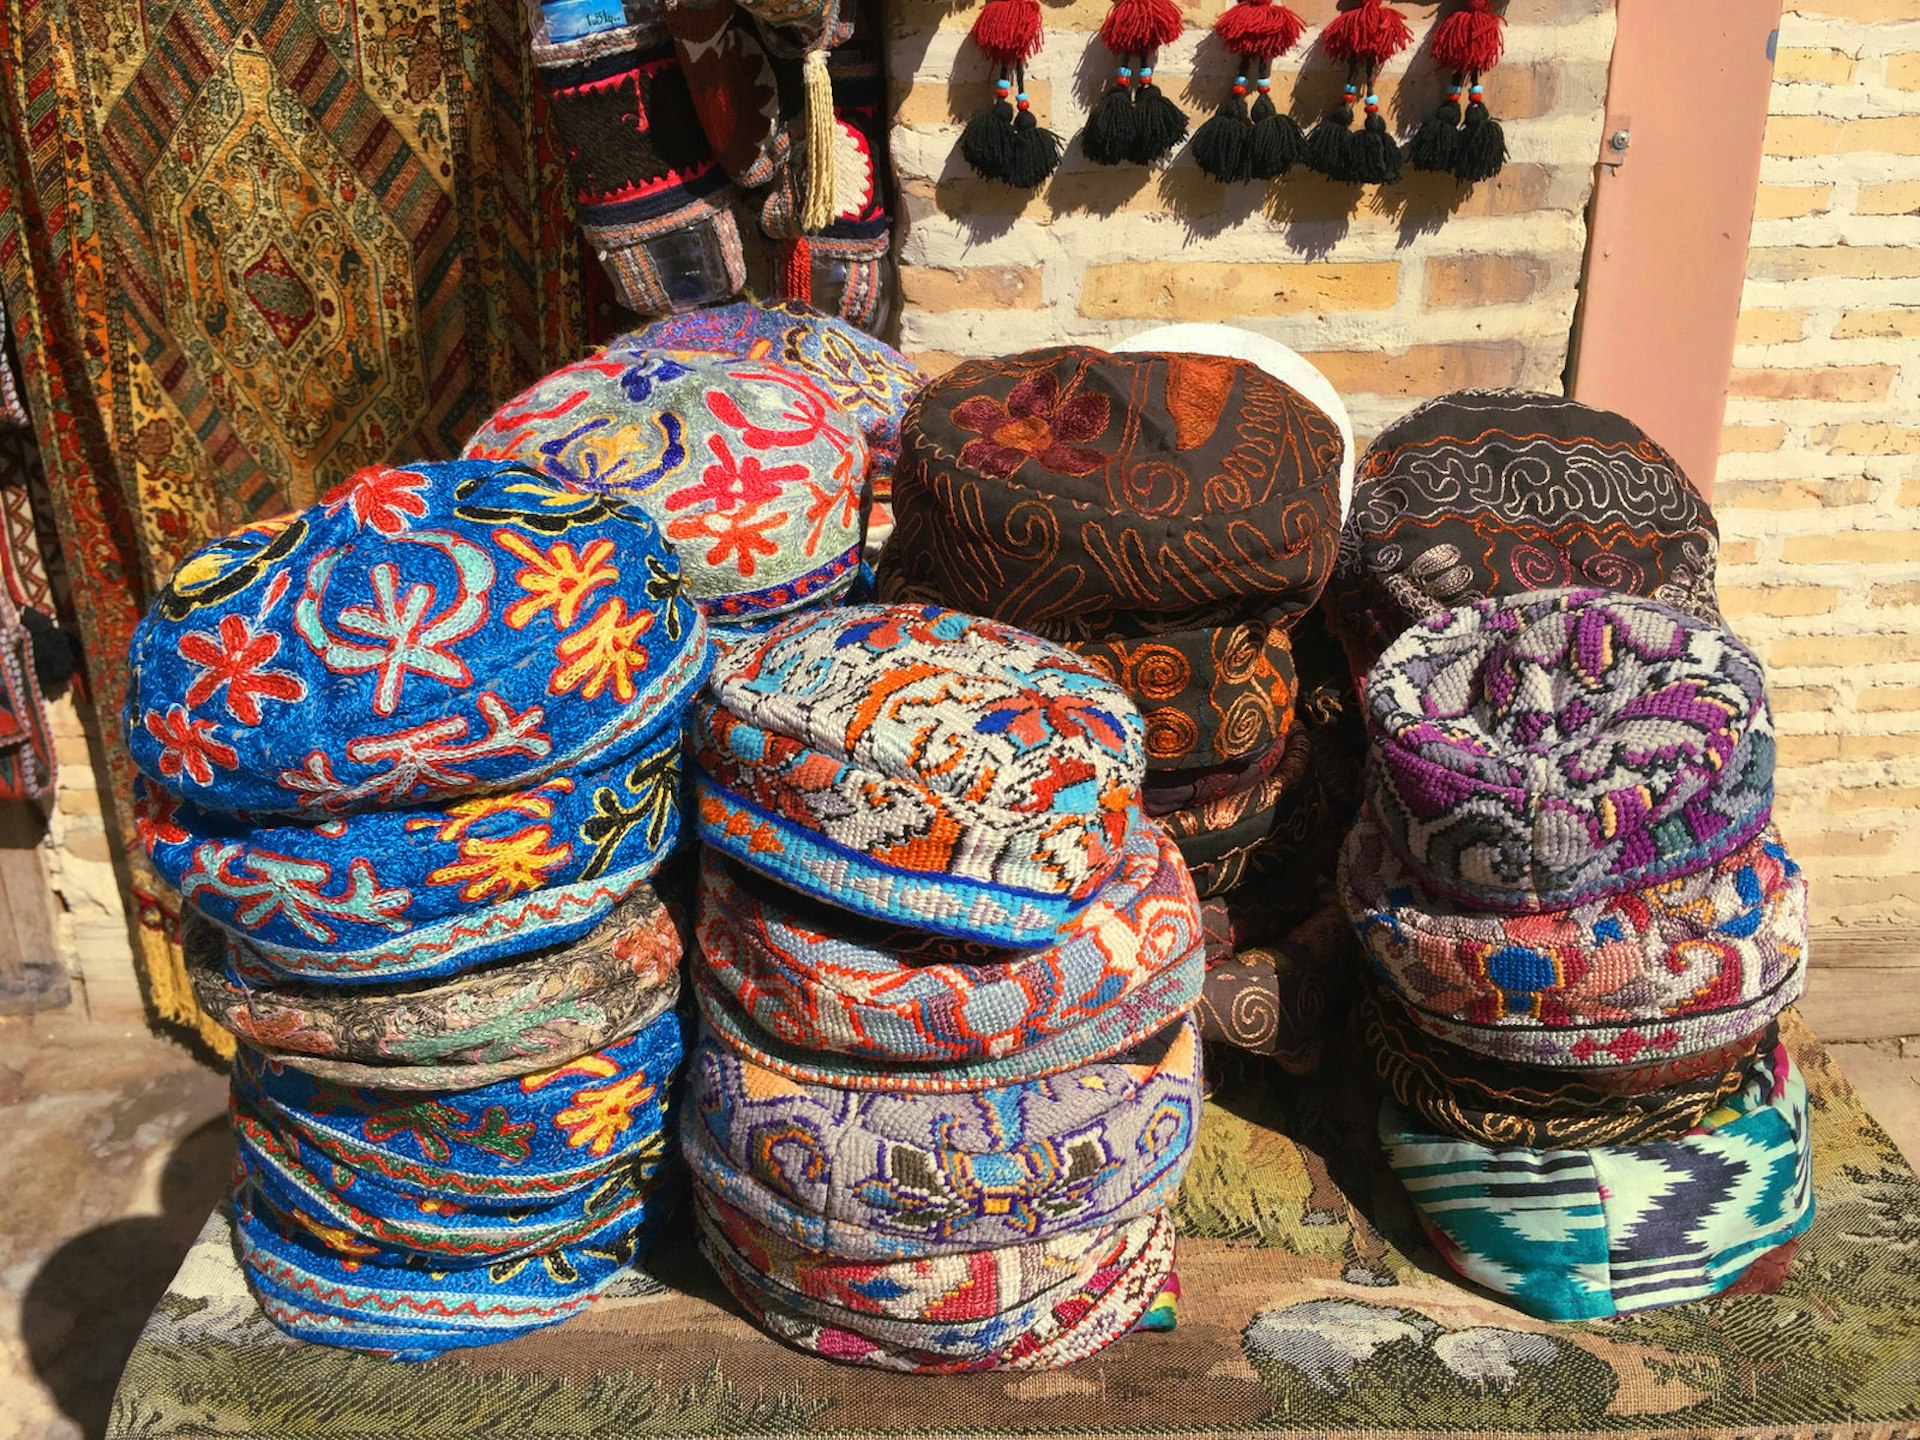 Stacks of brightly coloured embroidered round hats on a small table in front of a brick wall